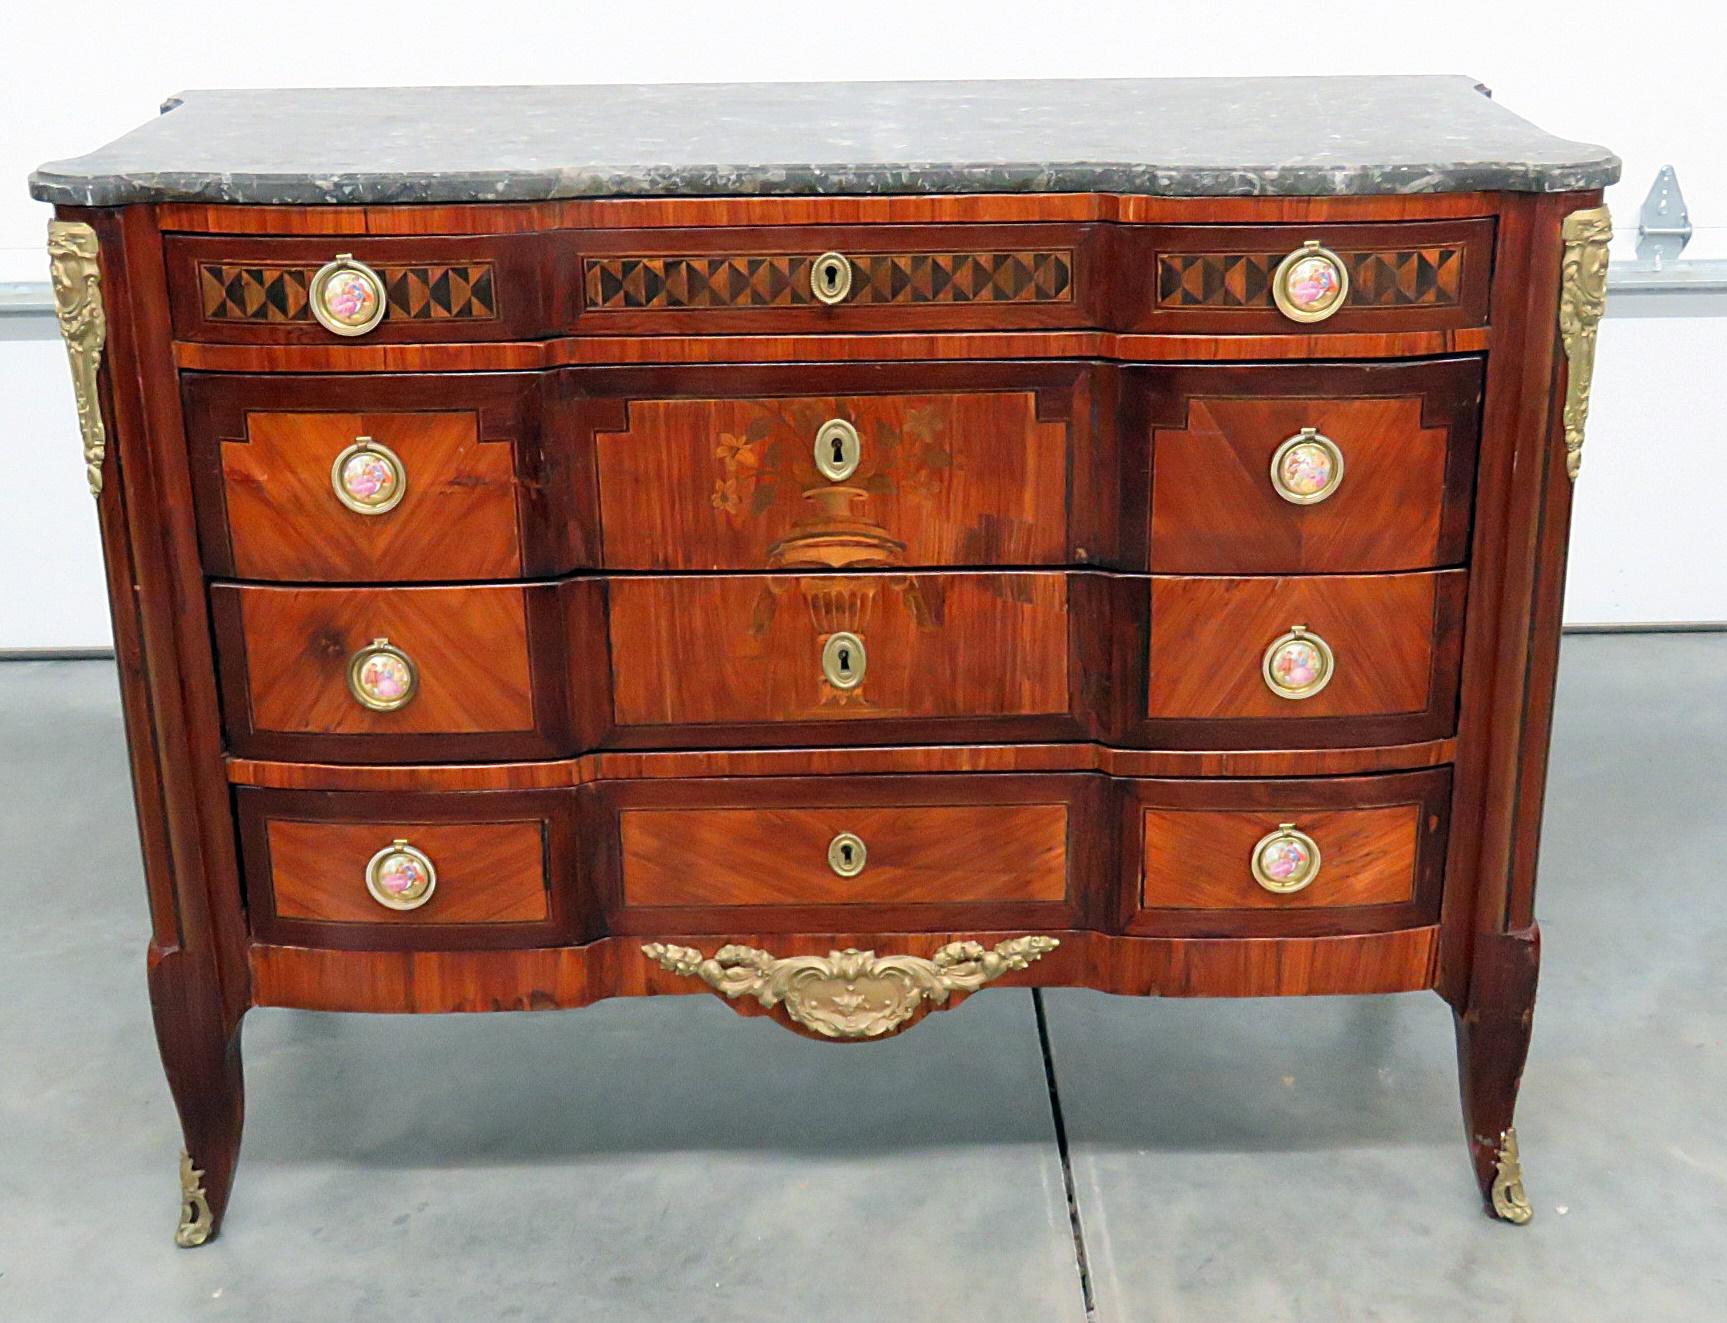 18th century French Empire style inlaid marble top commode with bronze mounts.